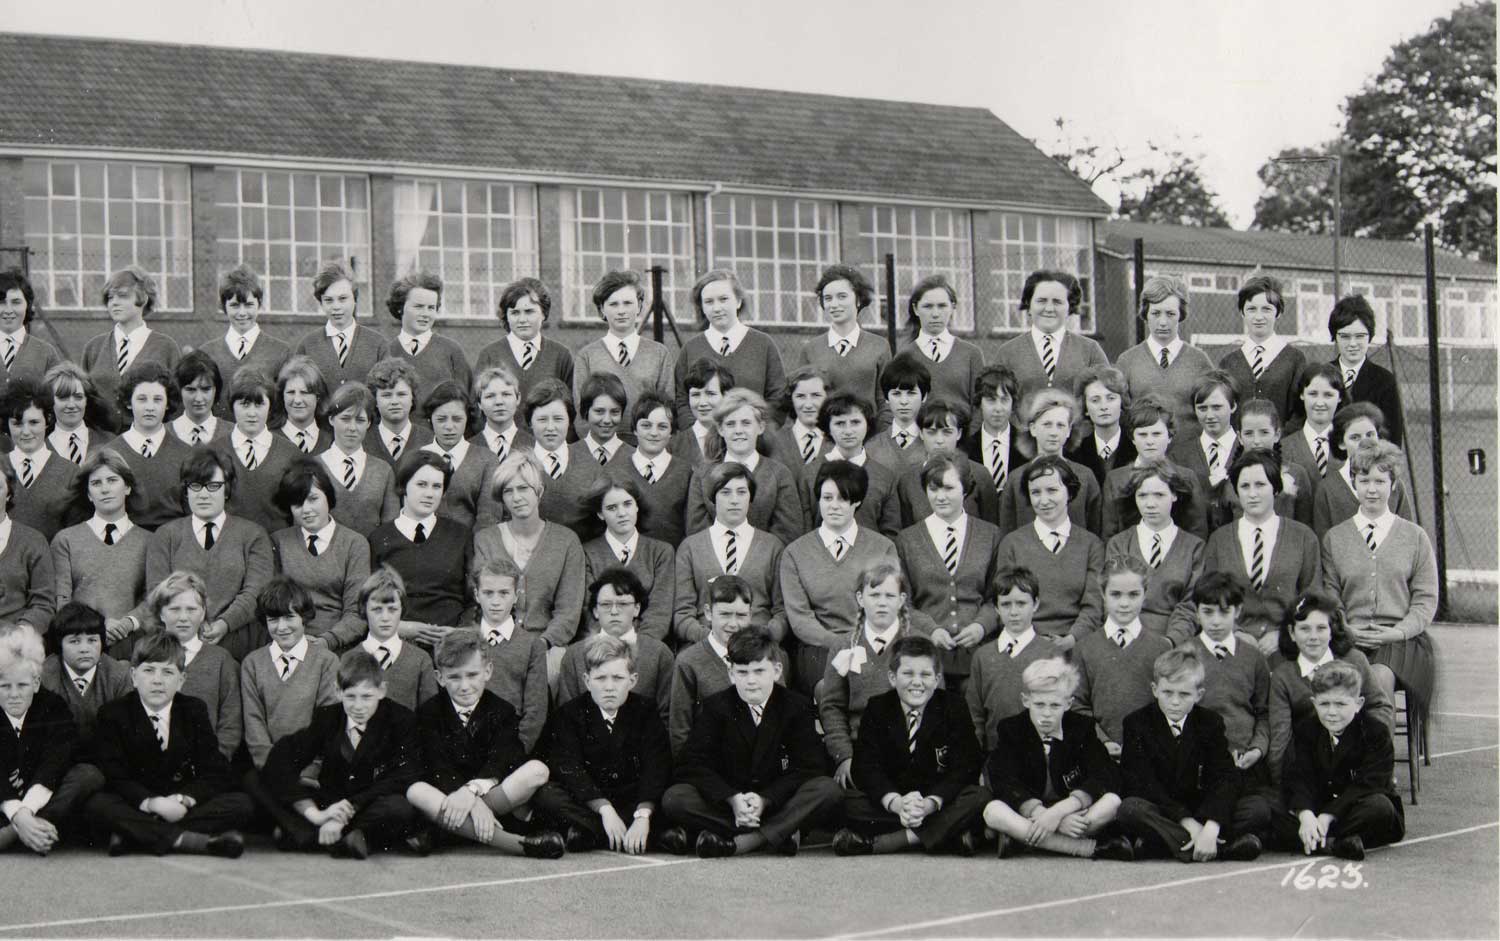 A photo of section1 of the Bells Grammar School photo from 1966 - Section 5